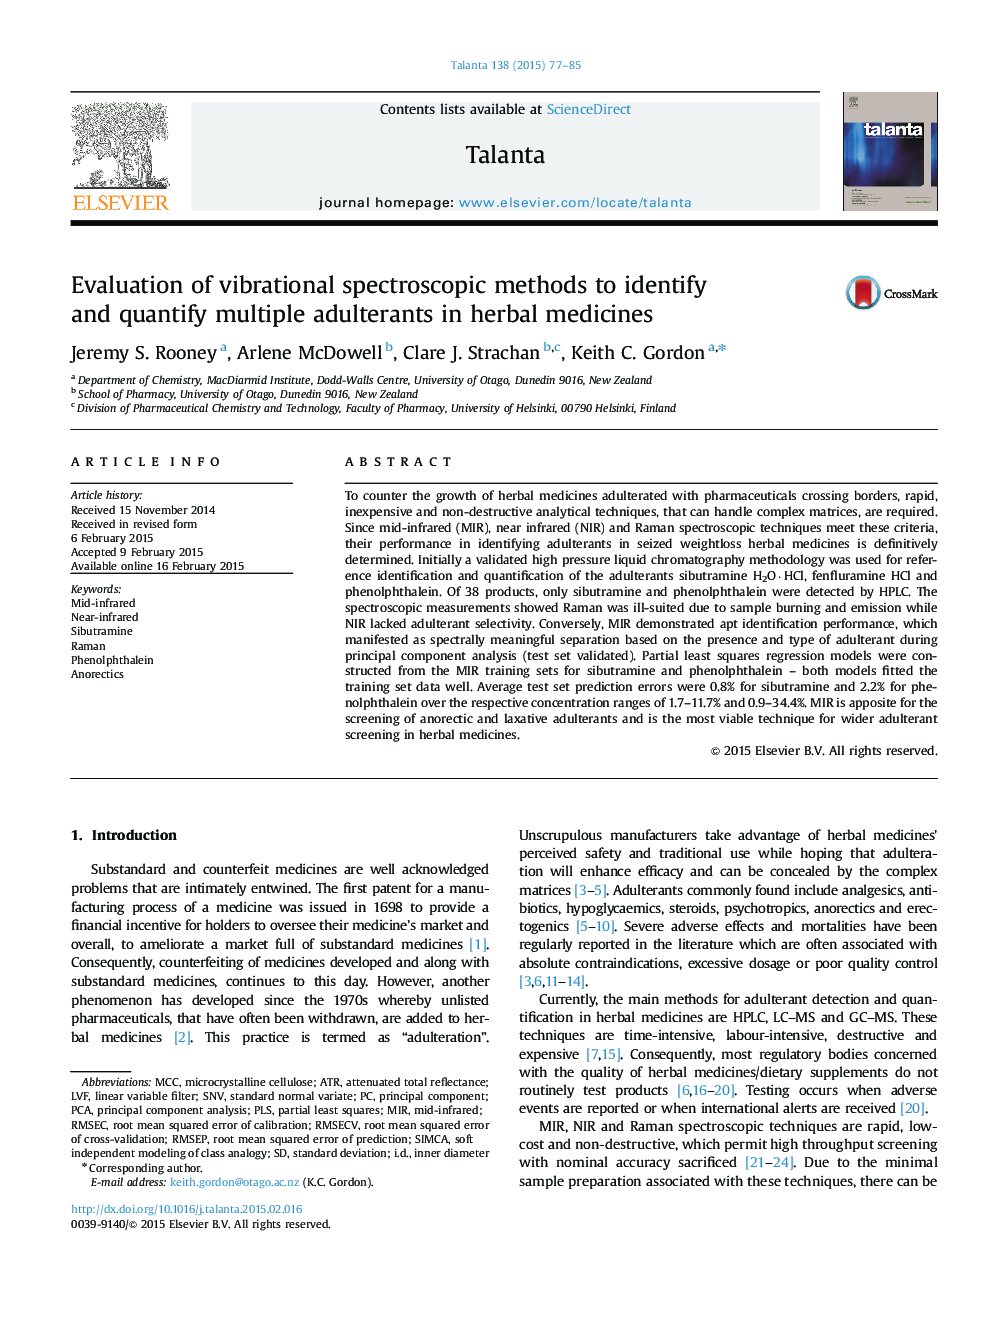 Evaluation of vibrational spectroscopic methods to identify and quantify multiple adulterants in herbal medicines